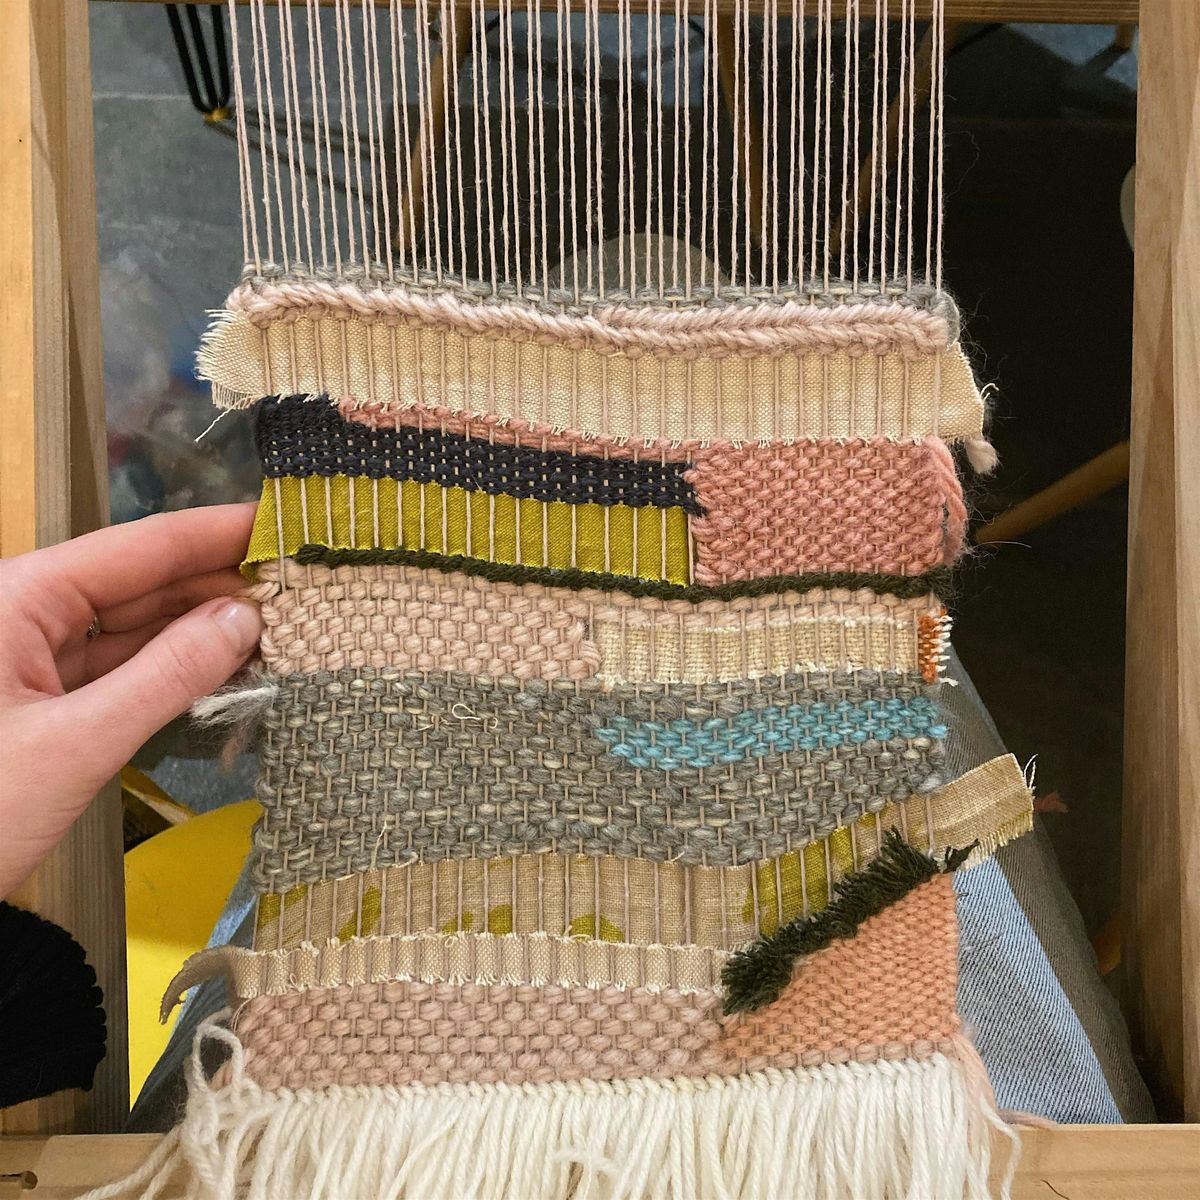 An Introduction to Frame Loom Weaving